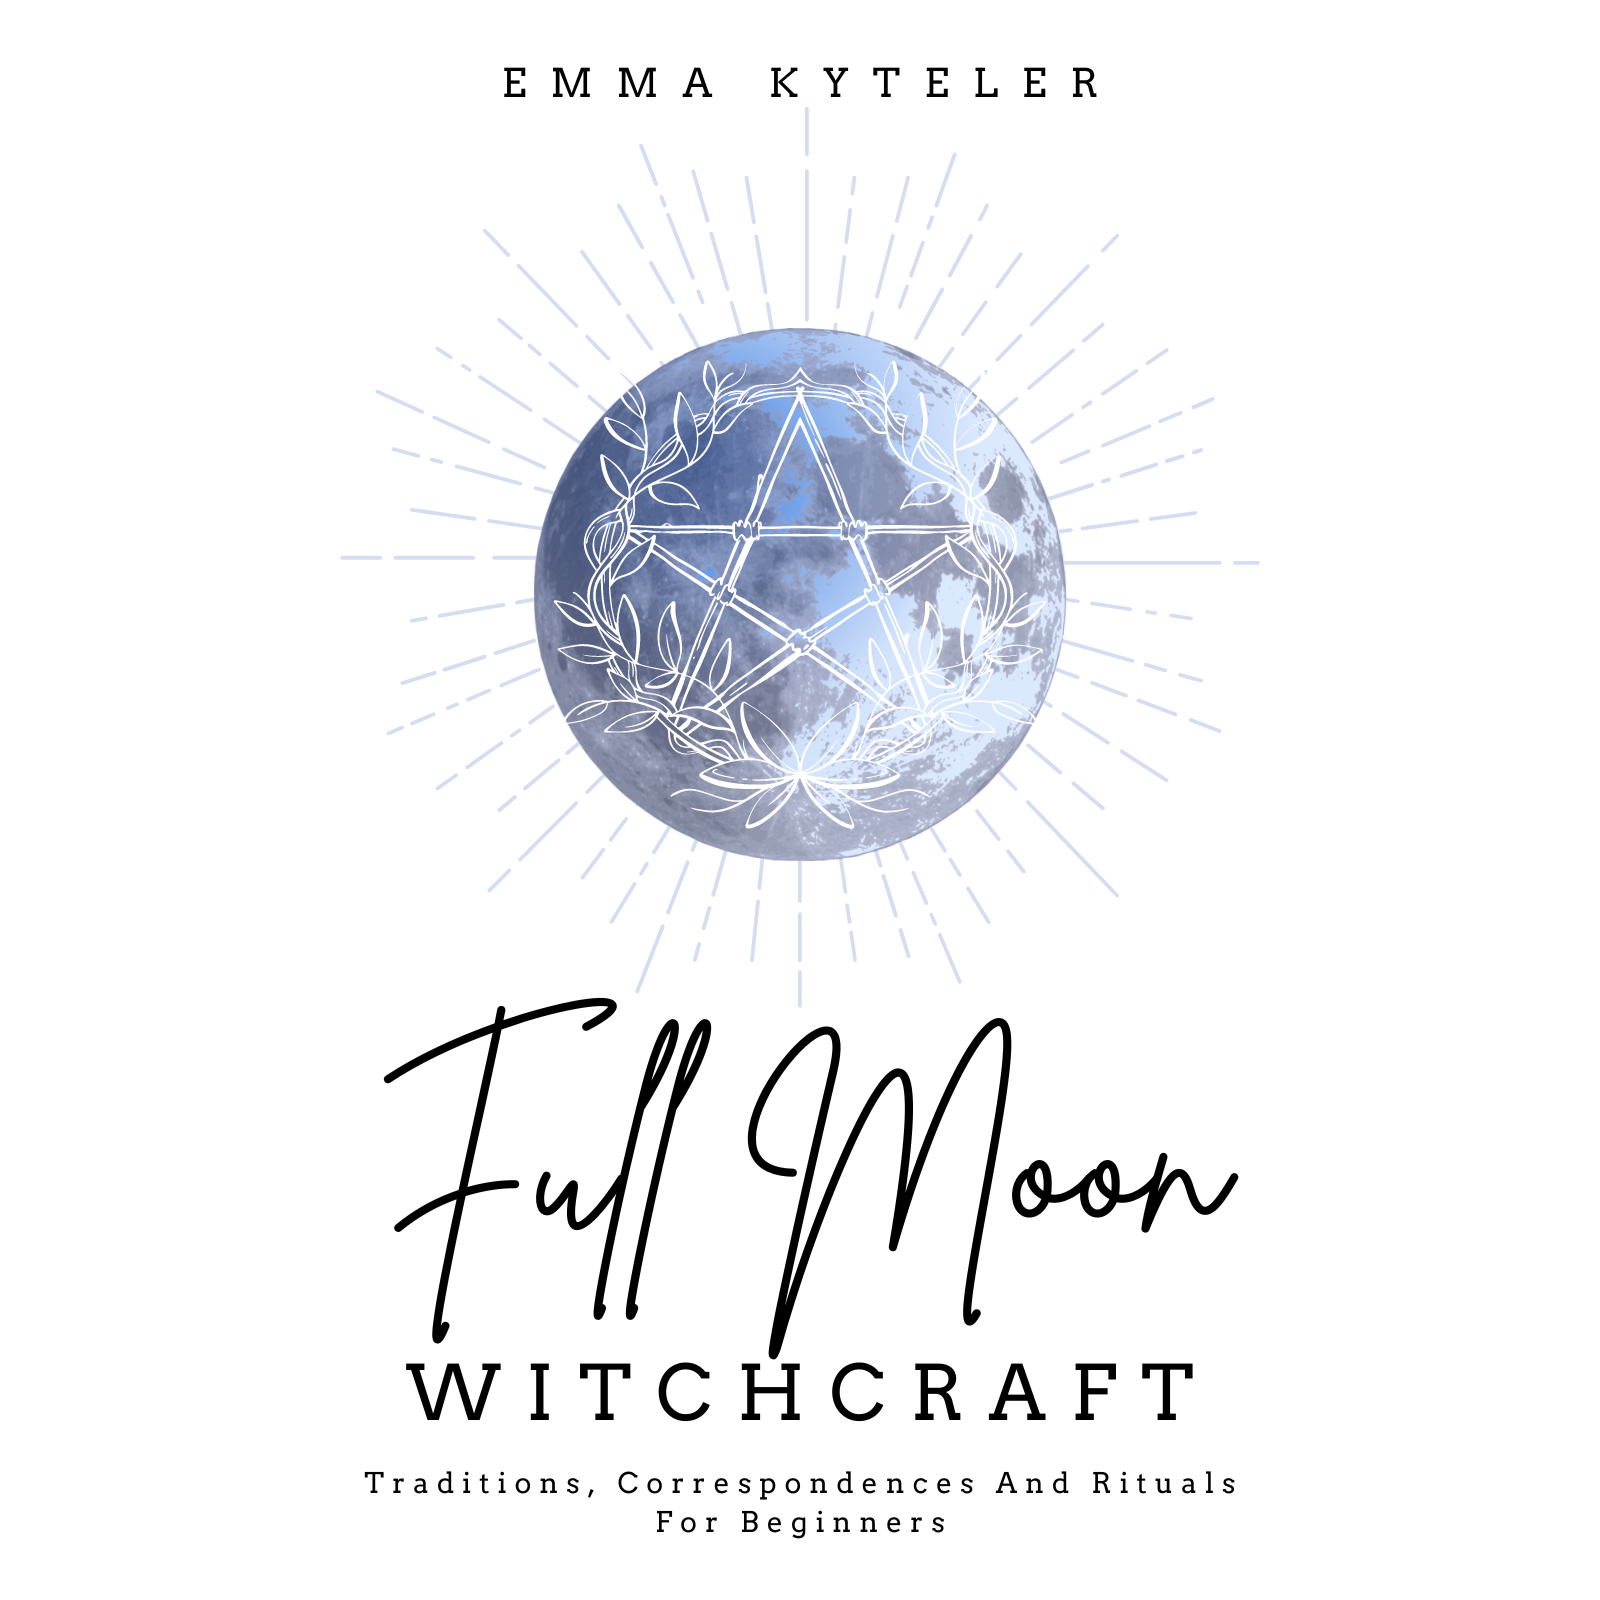 Full Moon Witchcraft Traditions, Correspondences And Rituals For Beginners (1600 × 1600 px)